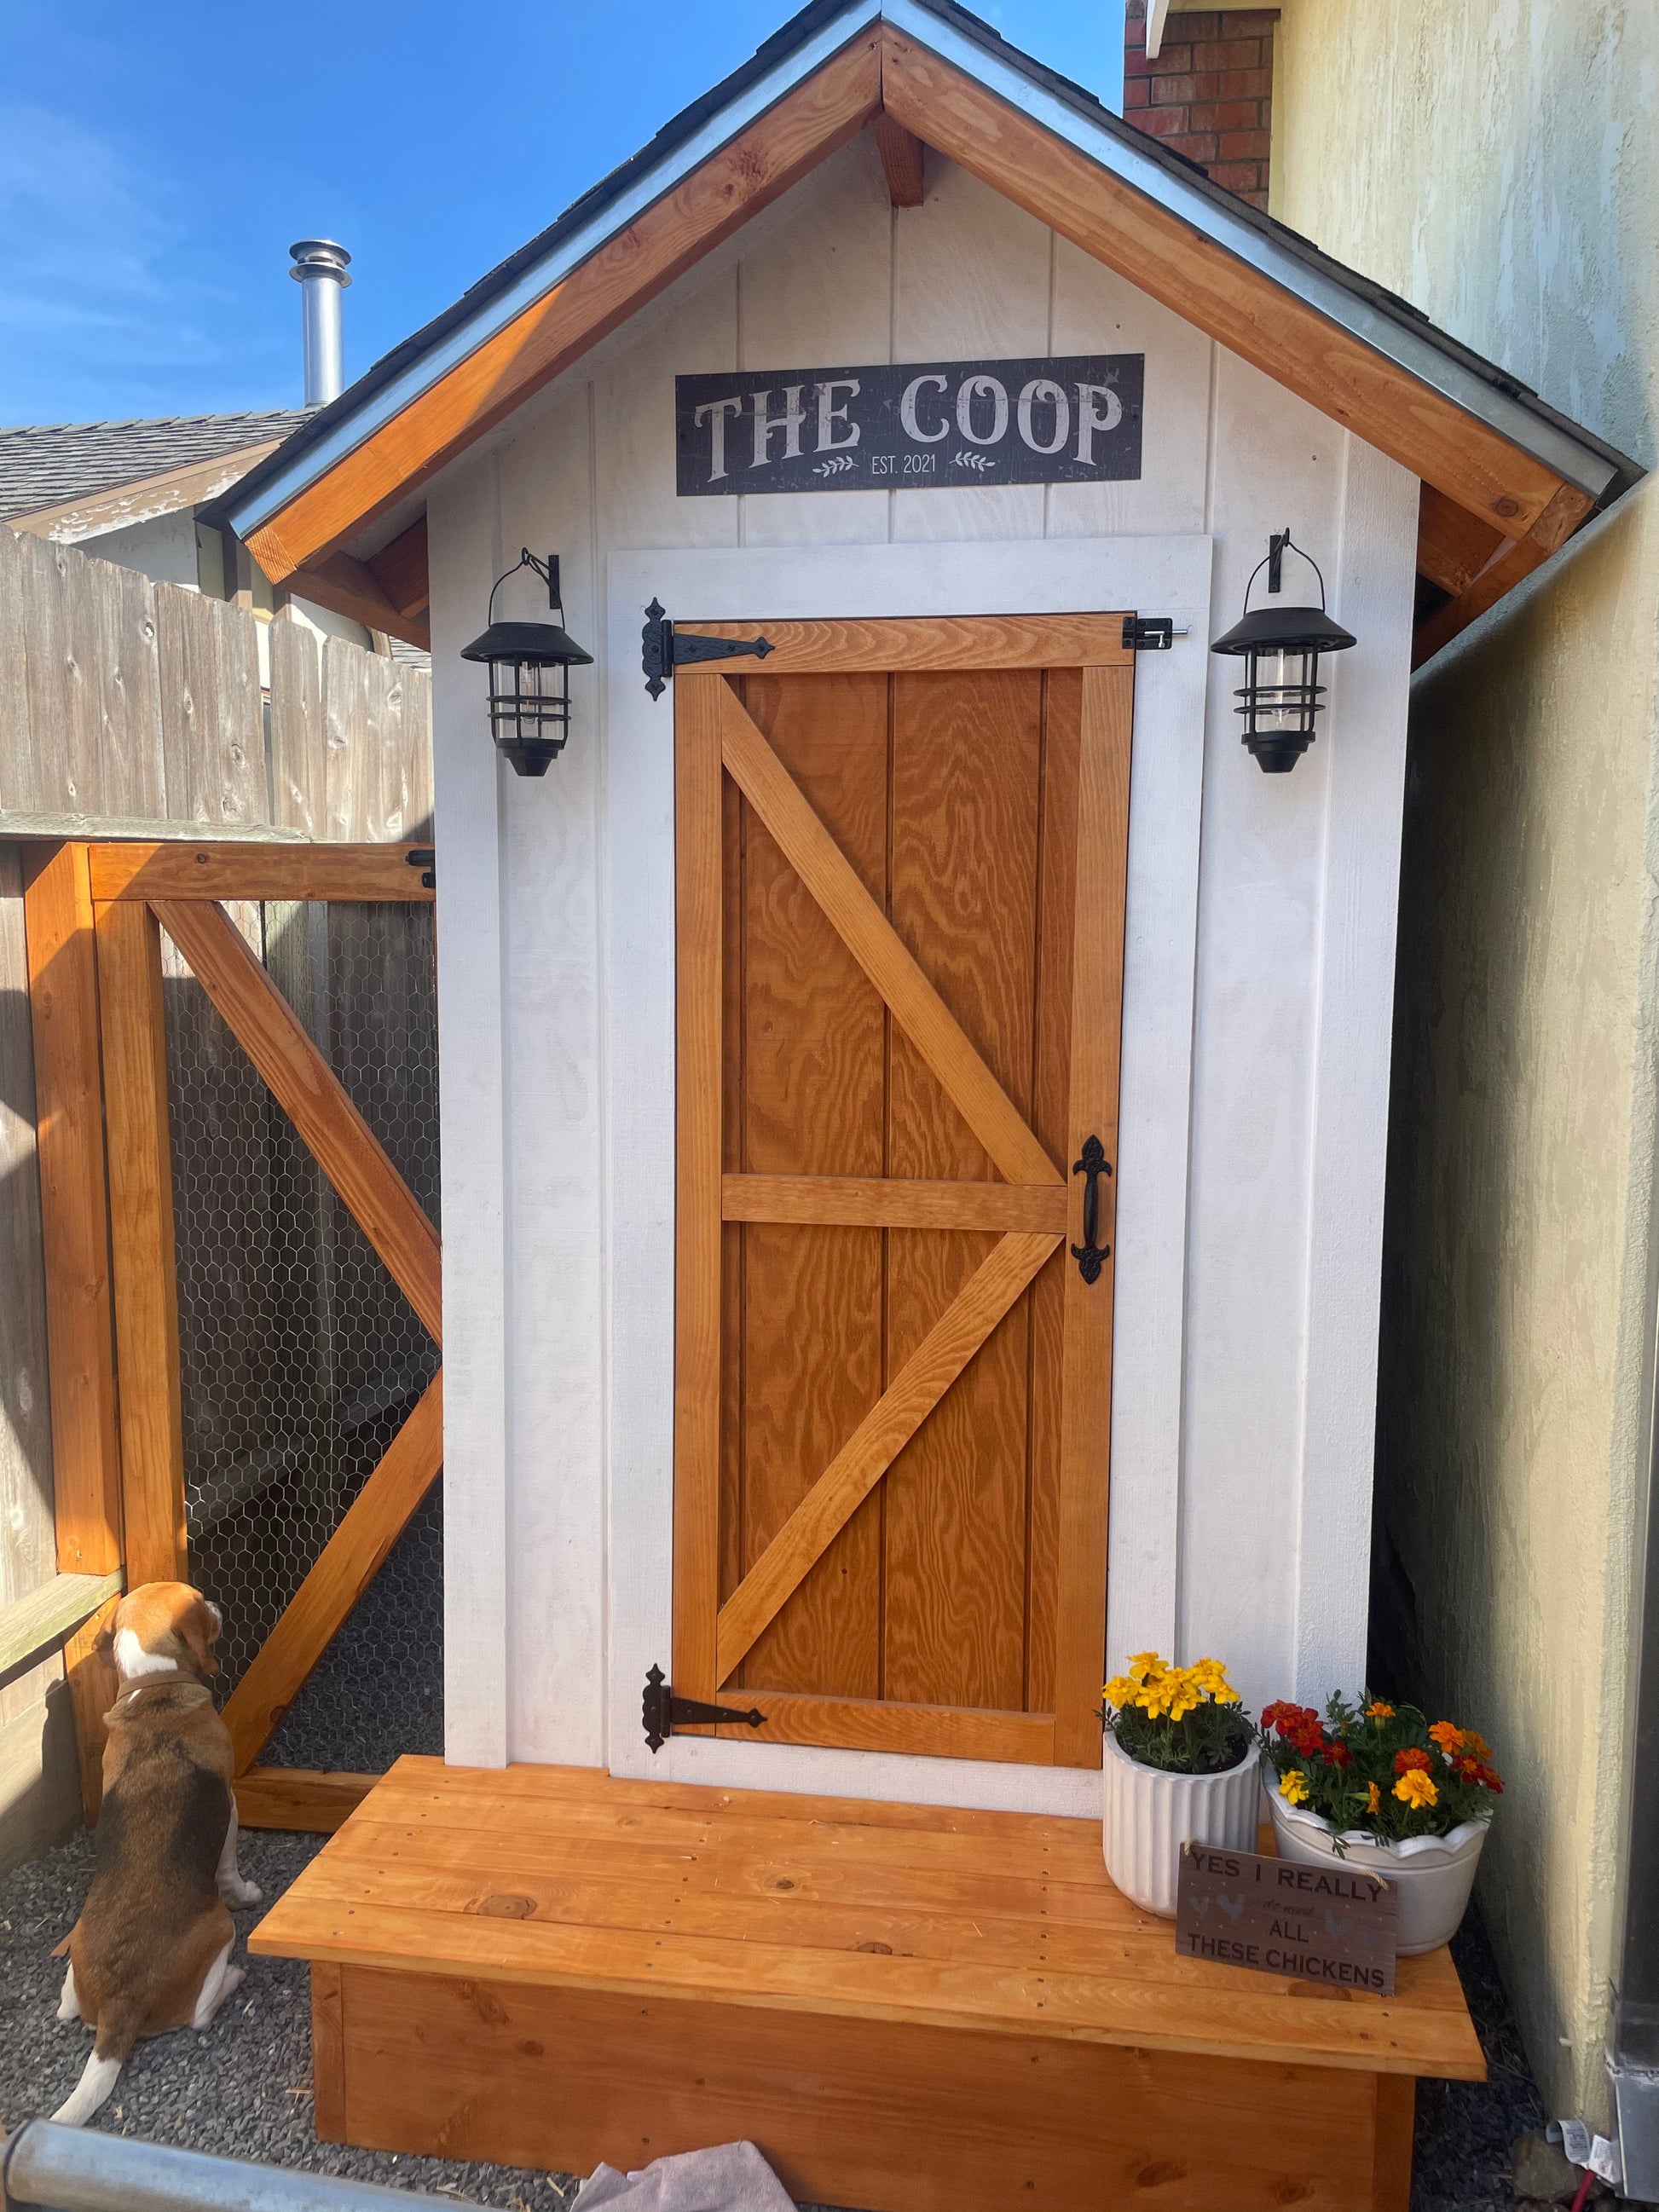 The Coop | Metal crackle black/charcoal outdoor chicken coop sign - The Sign Shoppe 